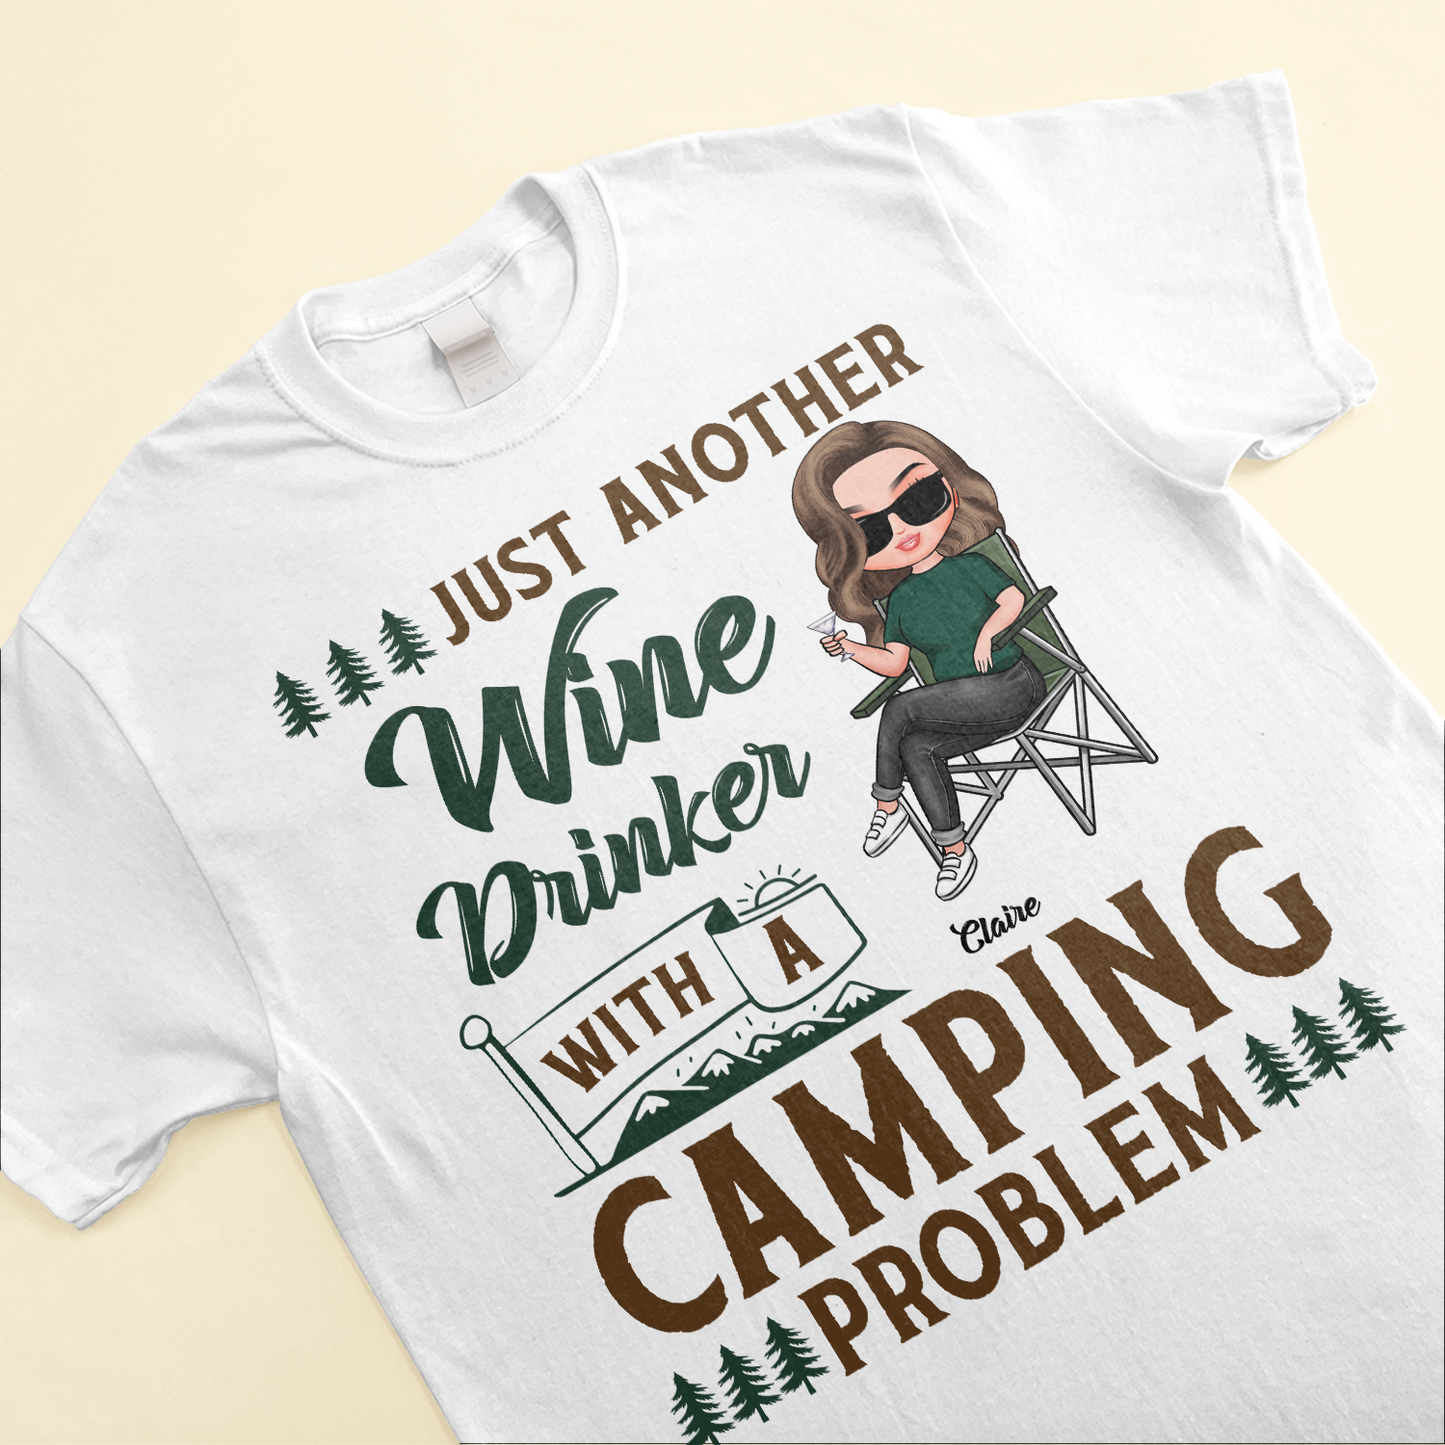 Wine Drinker With Camping Problem - Personalized shirt - Gift For Campers, Camping Lovers, Wine Lovers